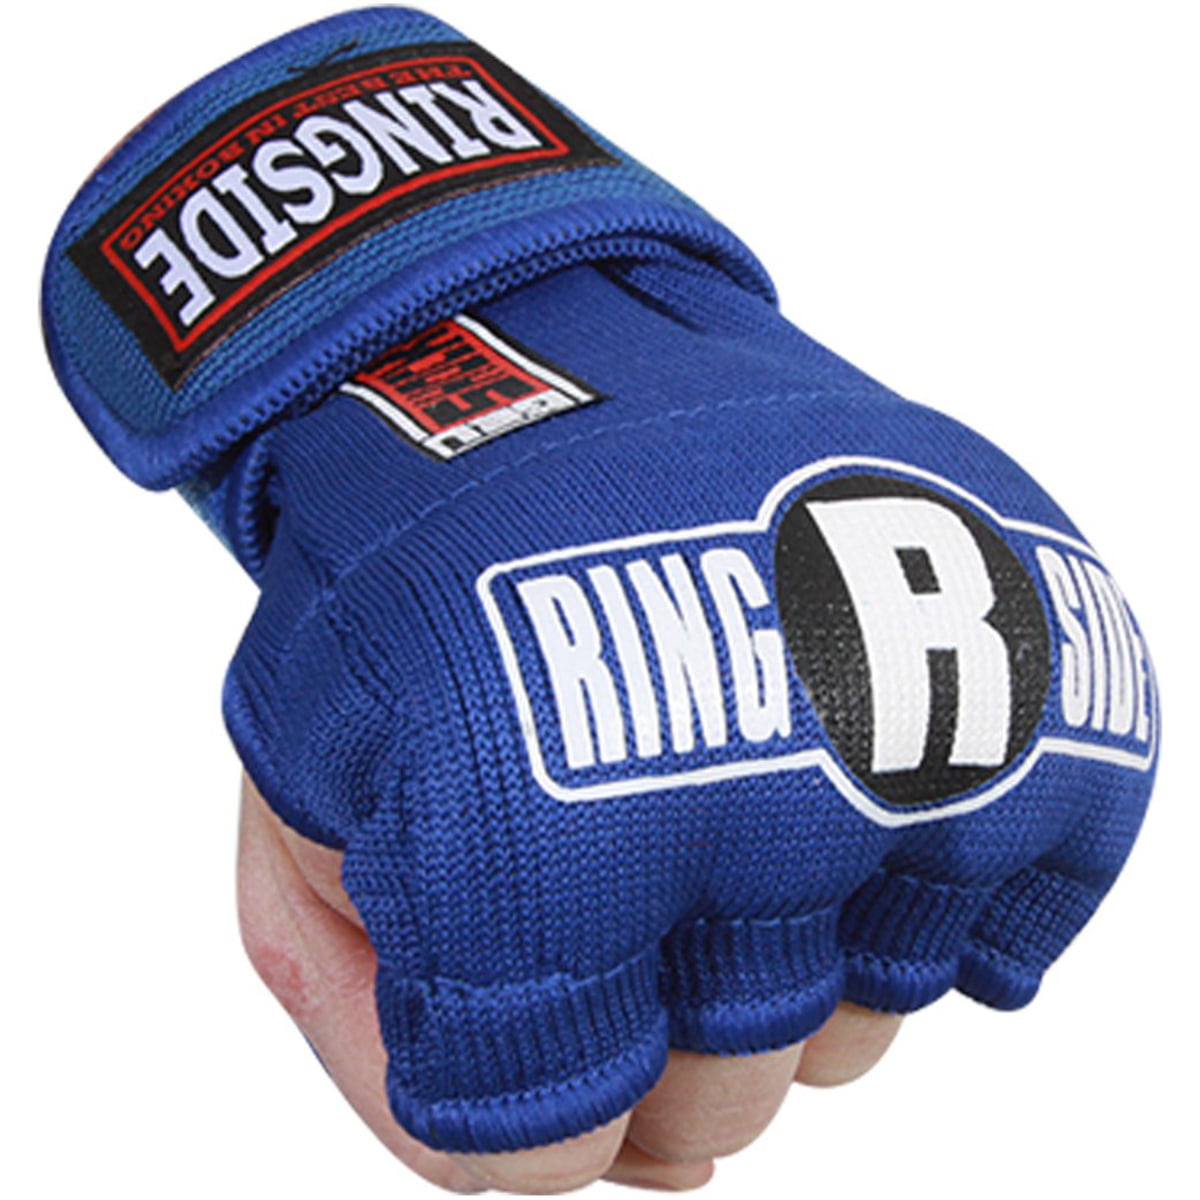 New Ringside Gel Boxing MMA Quick Handwraps Hand Wrap Wraps S/M Red/Black 